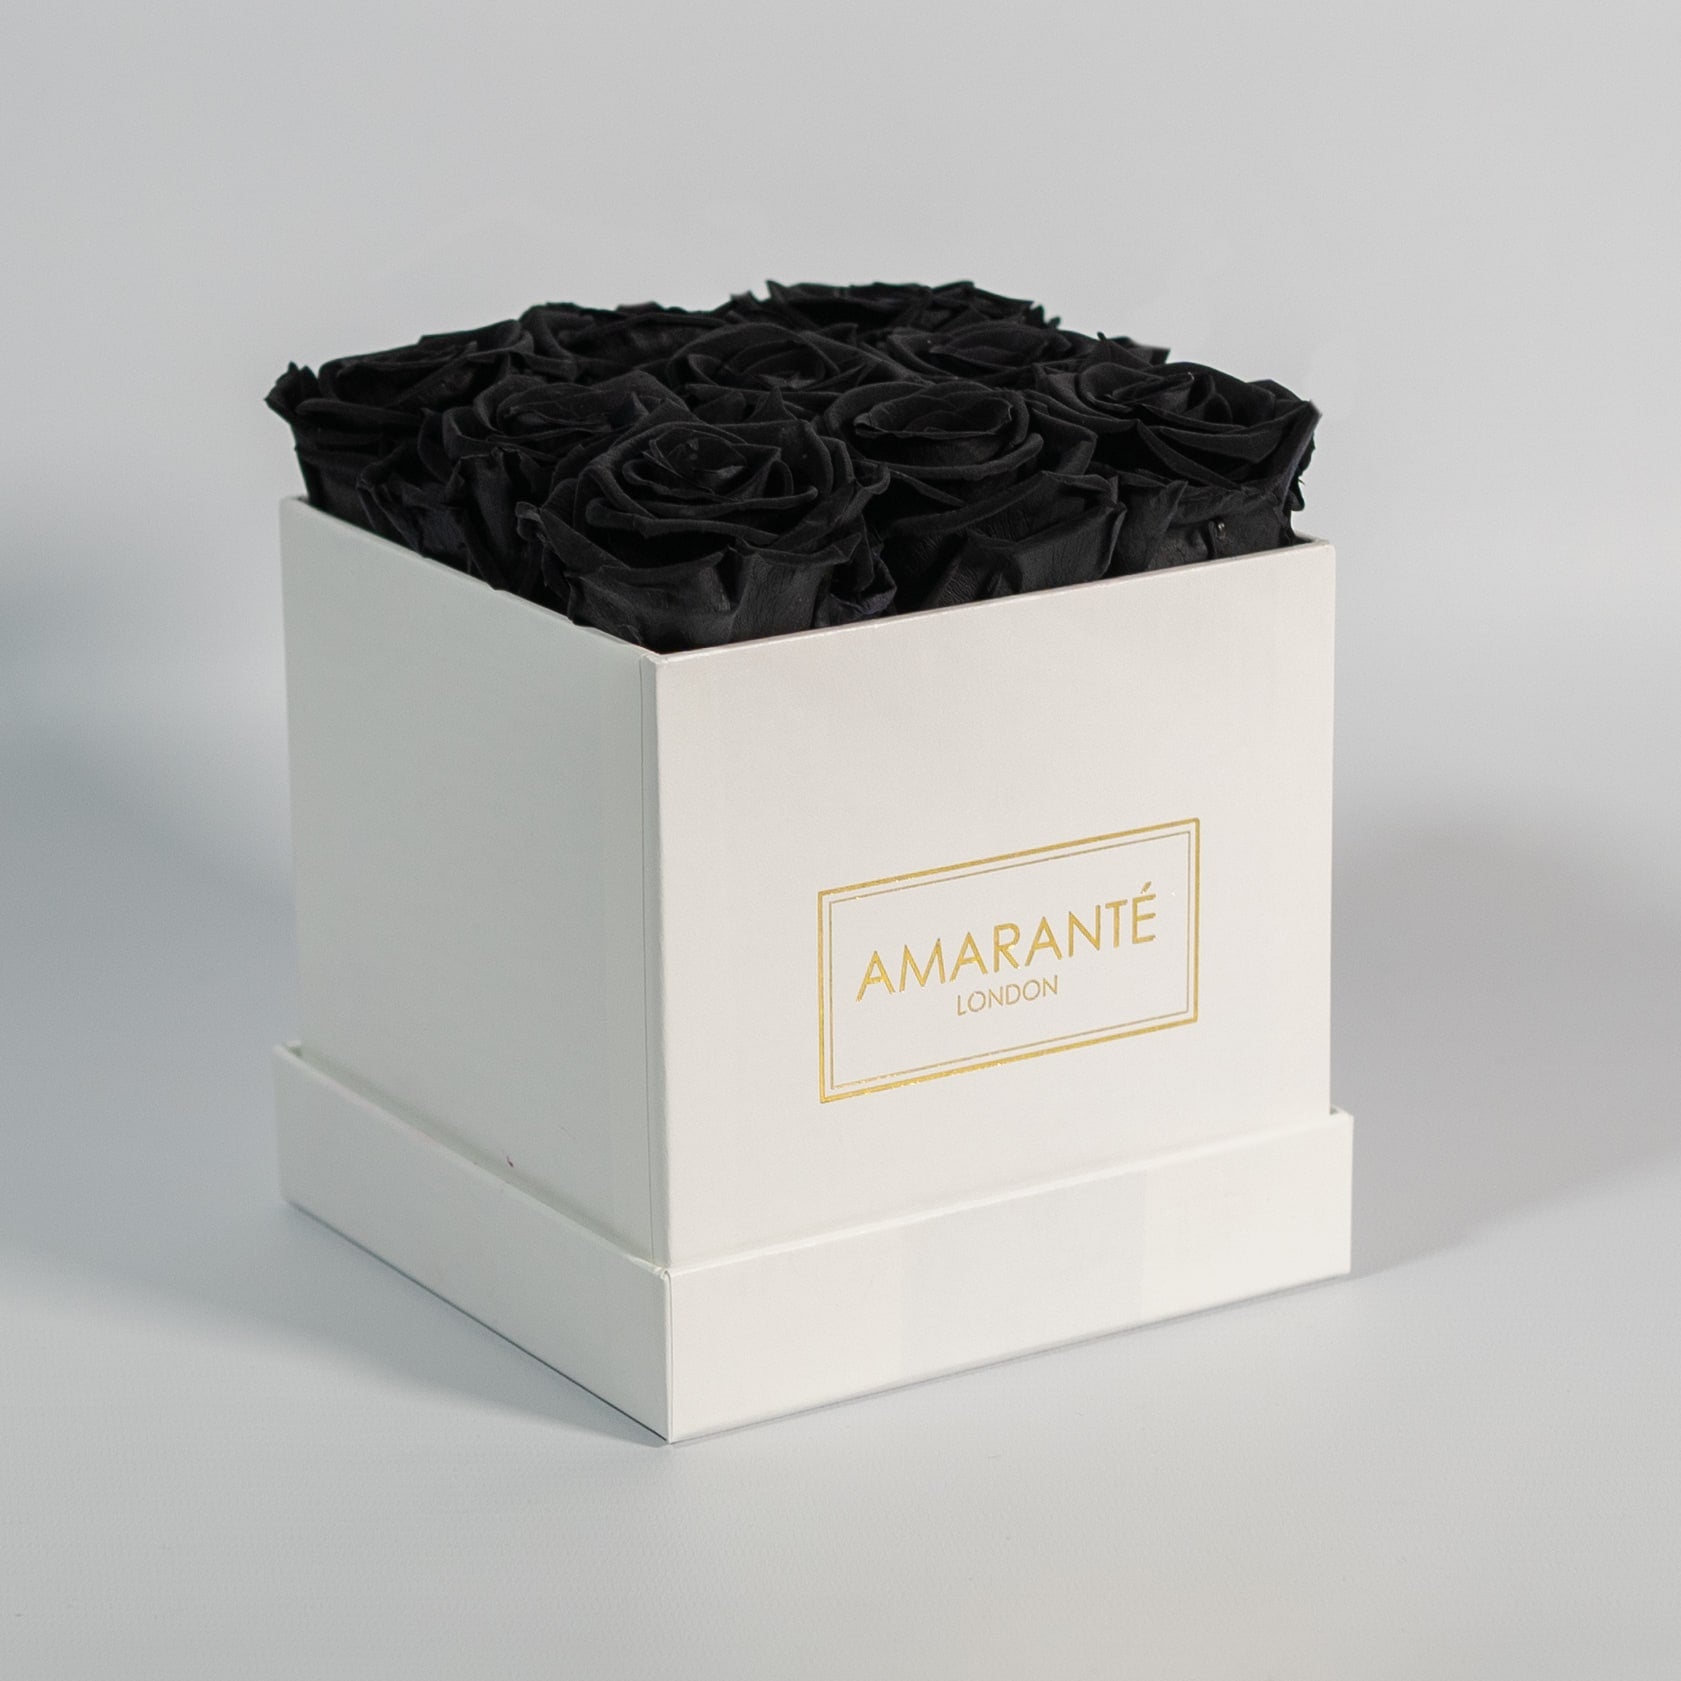 Bold black roses imbedded in a captivating white box 